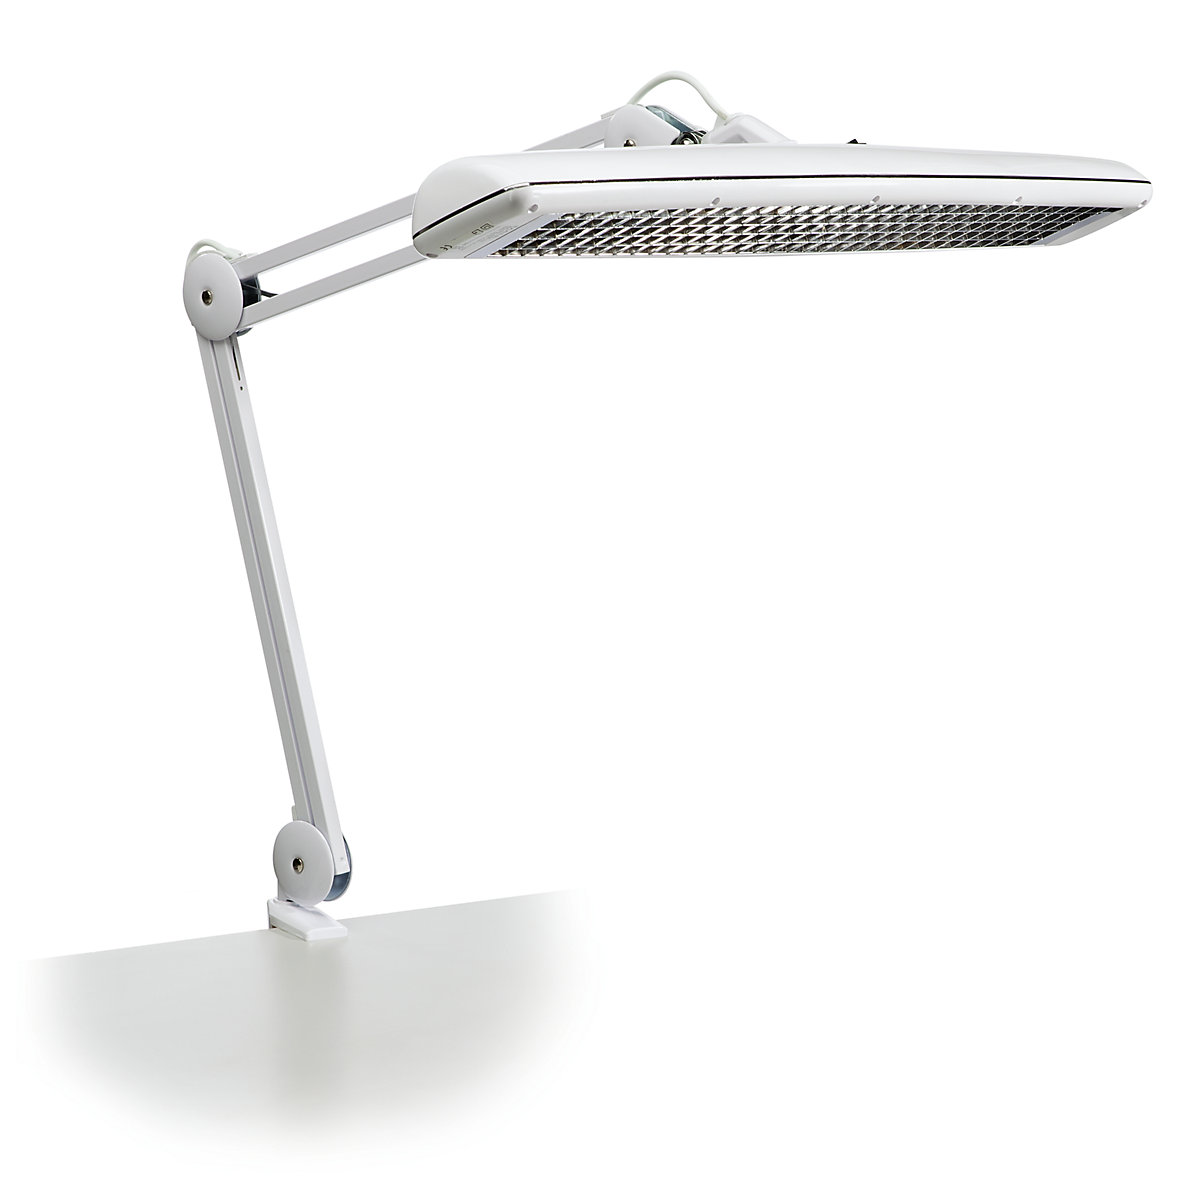 Officier Uitstroom Terugroepen MAUL – Workstation lamp, rotates through 360°: output 3 x 14 W, 2 jointed  arms, each 400 mm | KAISER+KRAFT